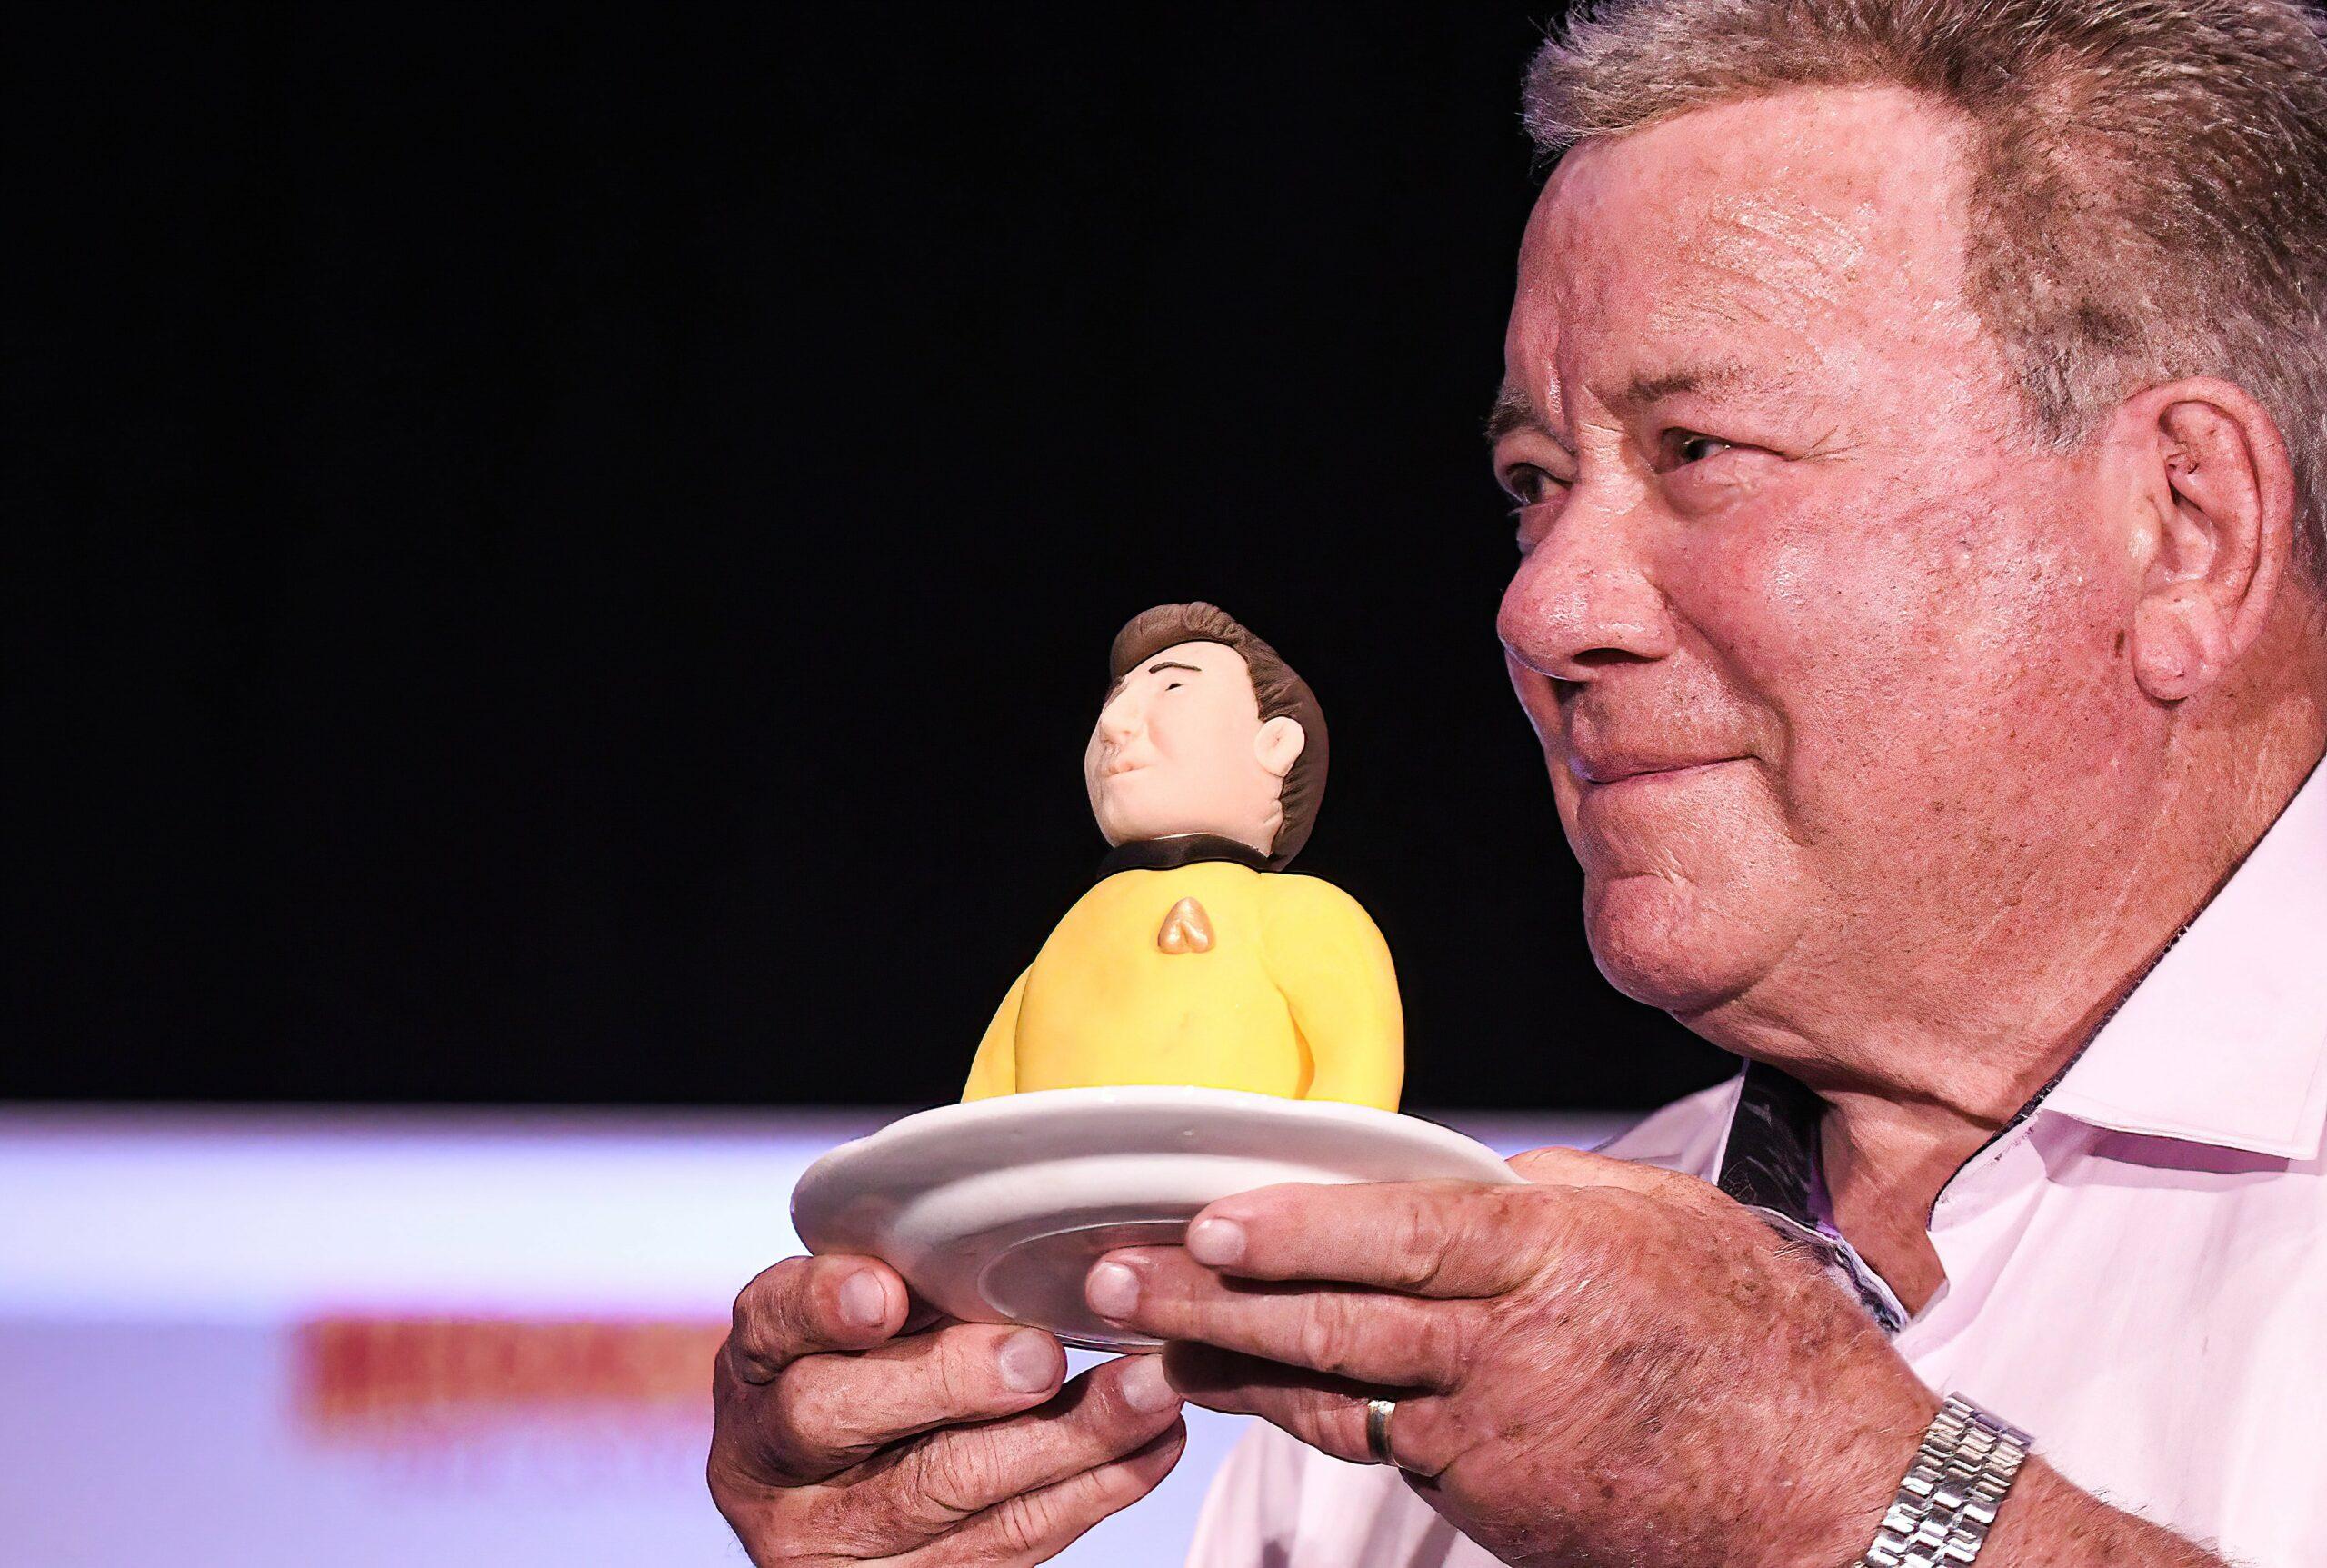 William Shatner holds a portion of a birthday cake presented to him at a Q